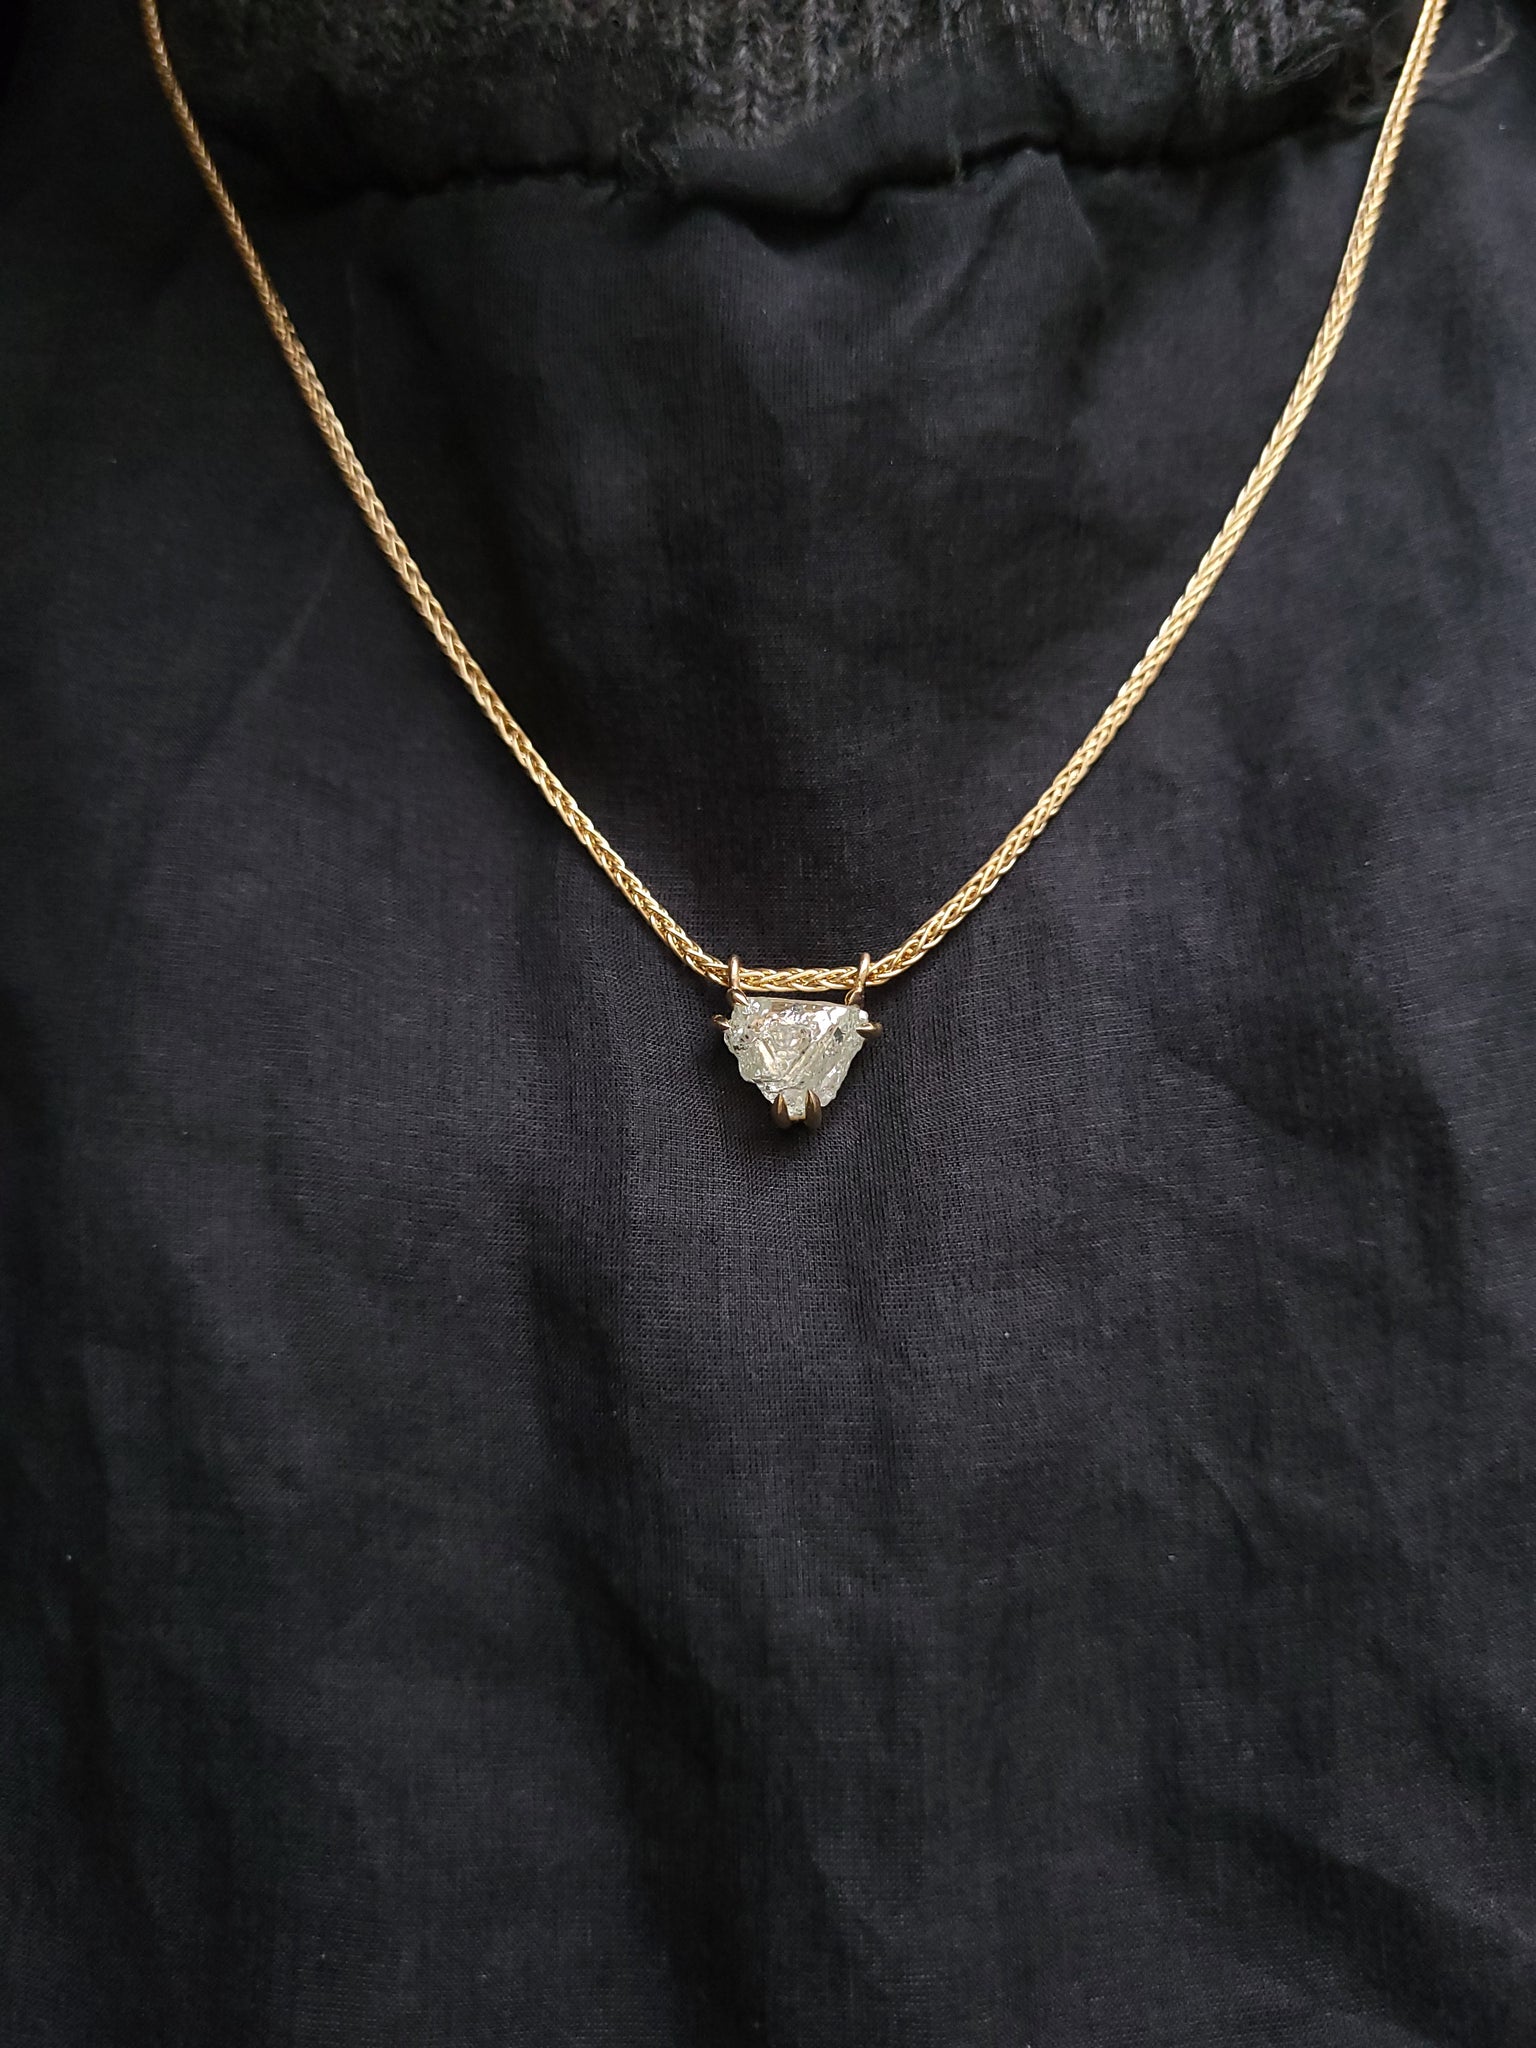 Rough Diamond with Character in Unique Gold Necklace – 5.50 ct.